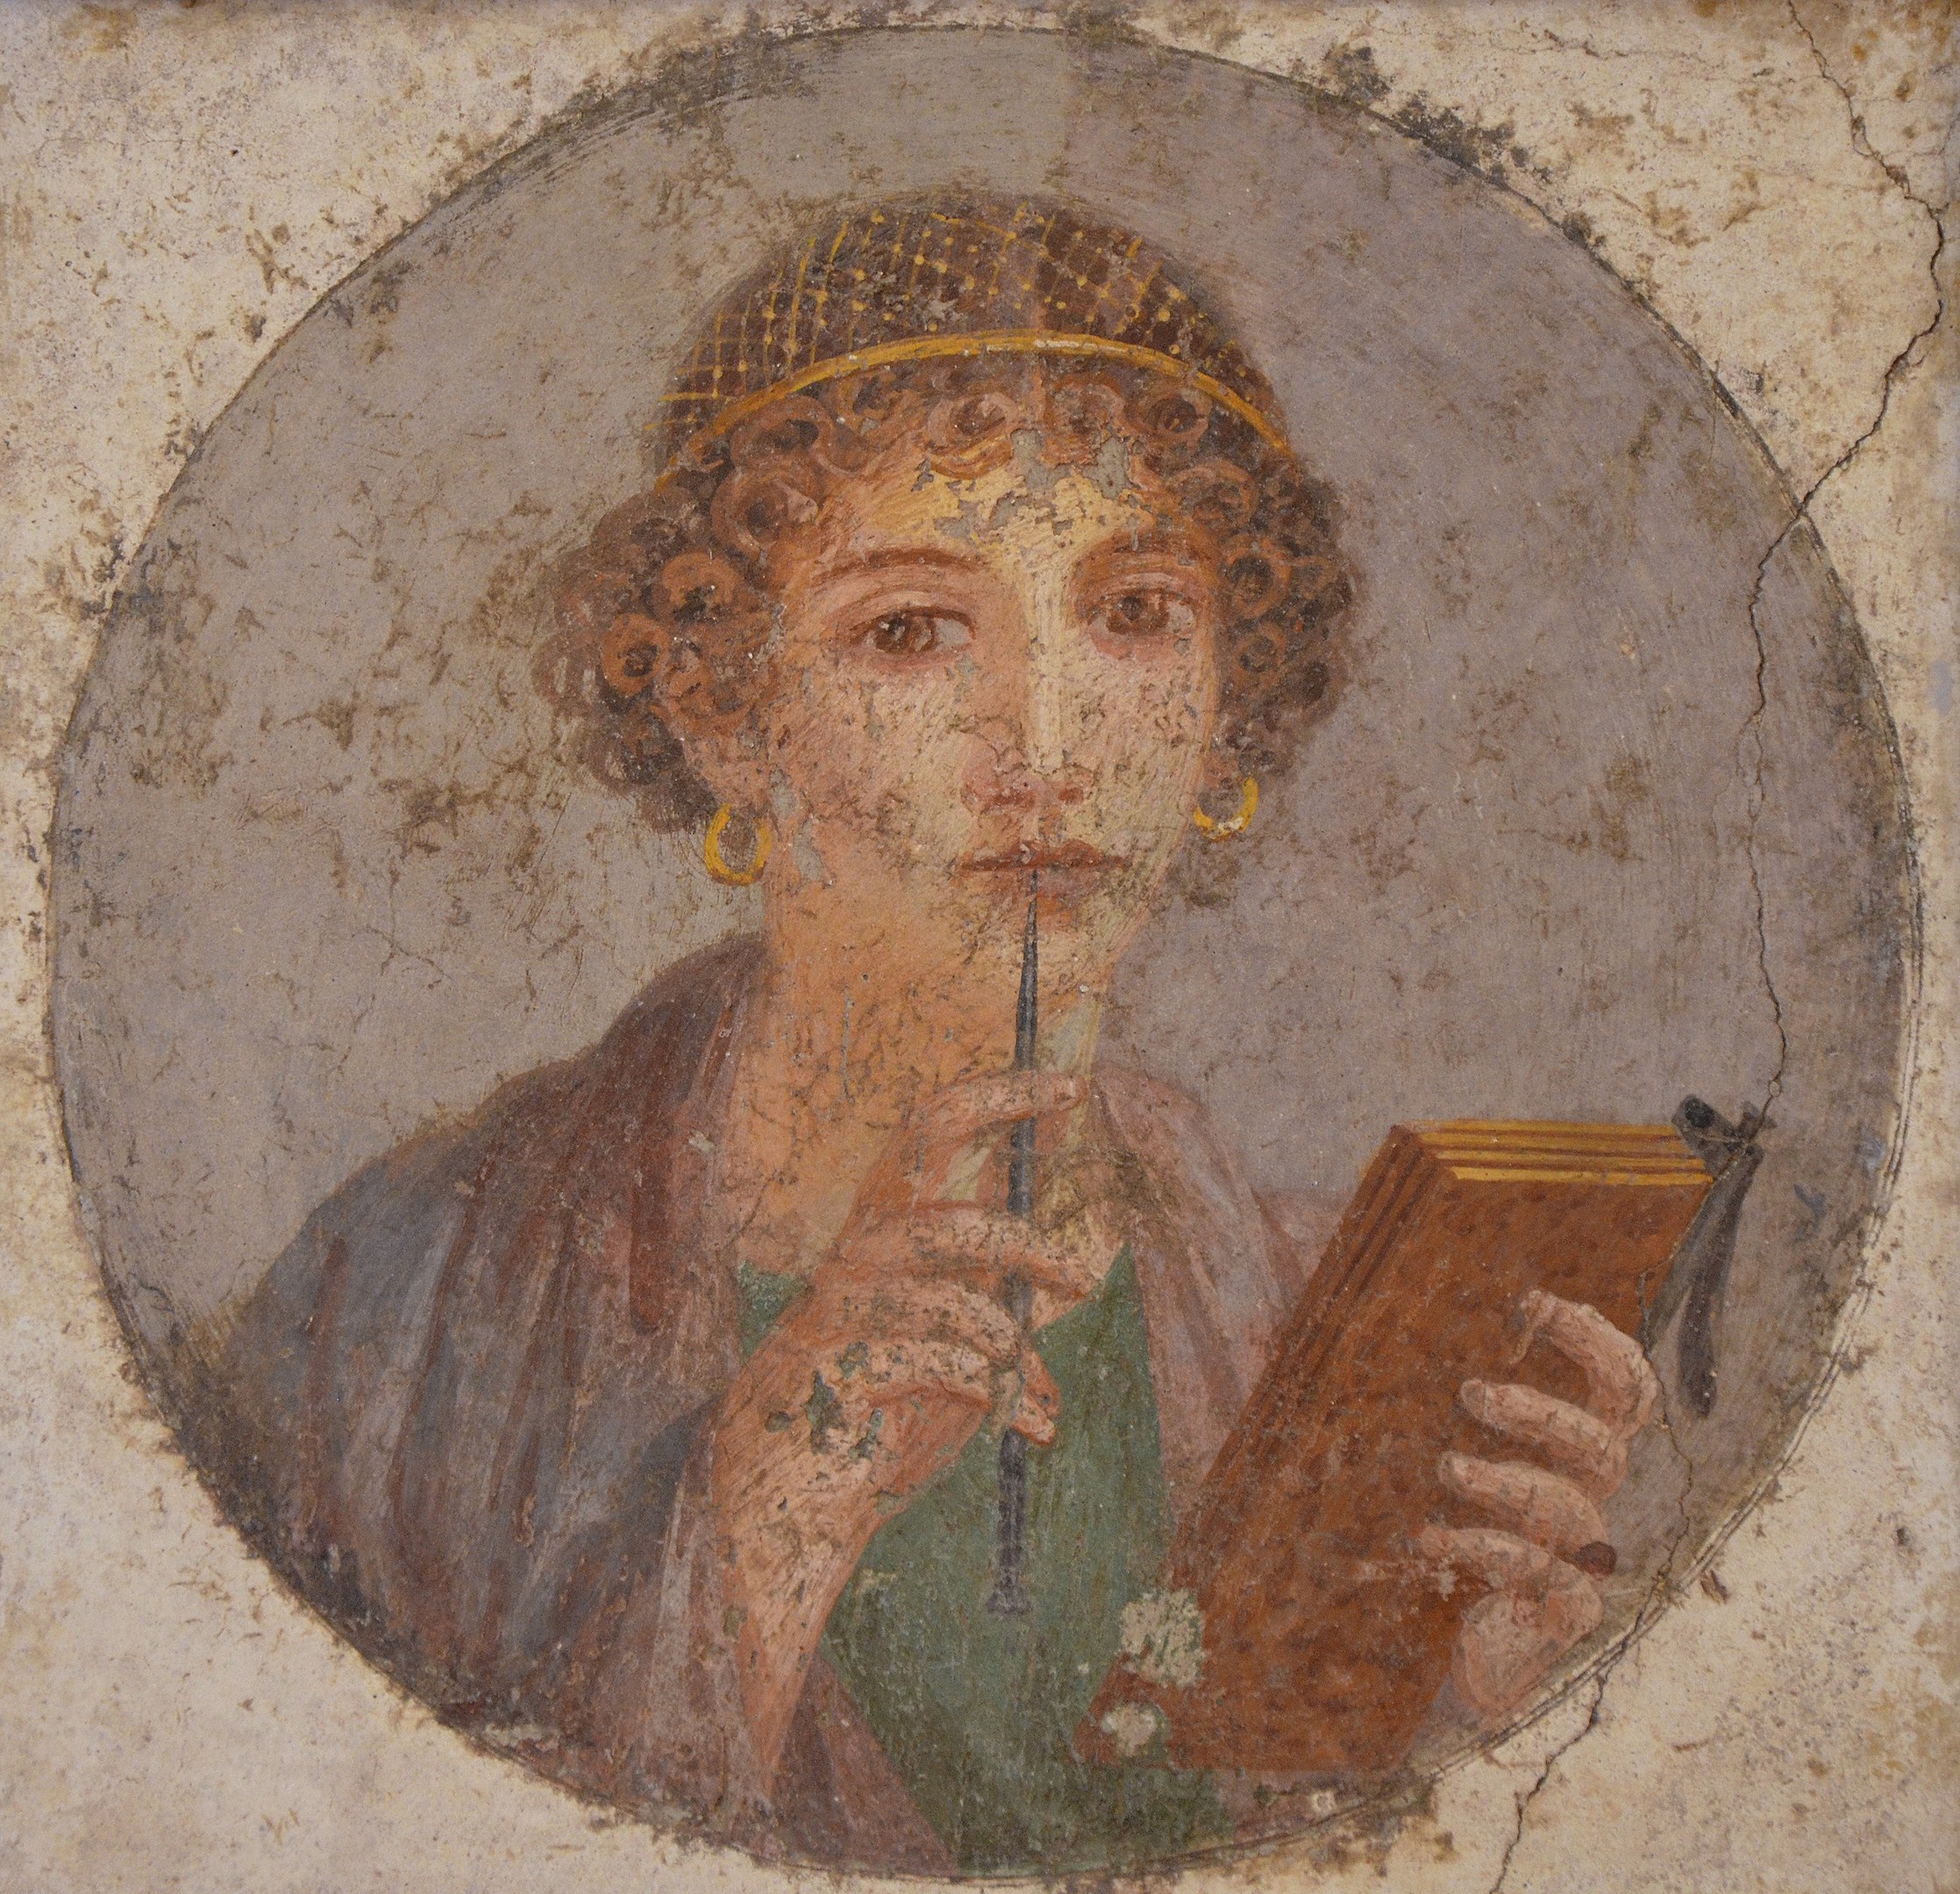 Woman With Wax Tablets and Stylus by Unknown Artist - 50-79 - 38 x 37 cm Museo Archeologico Nazionale di Napoli